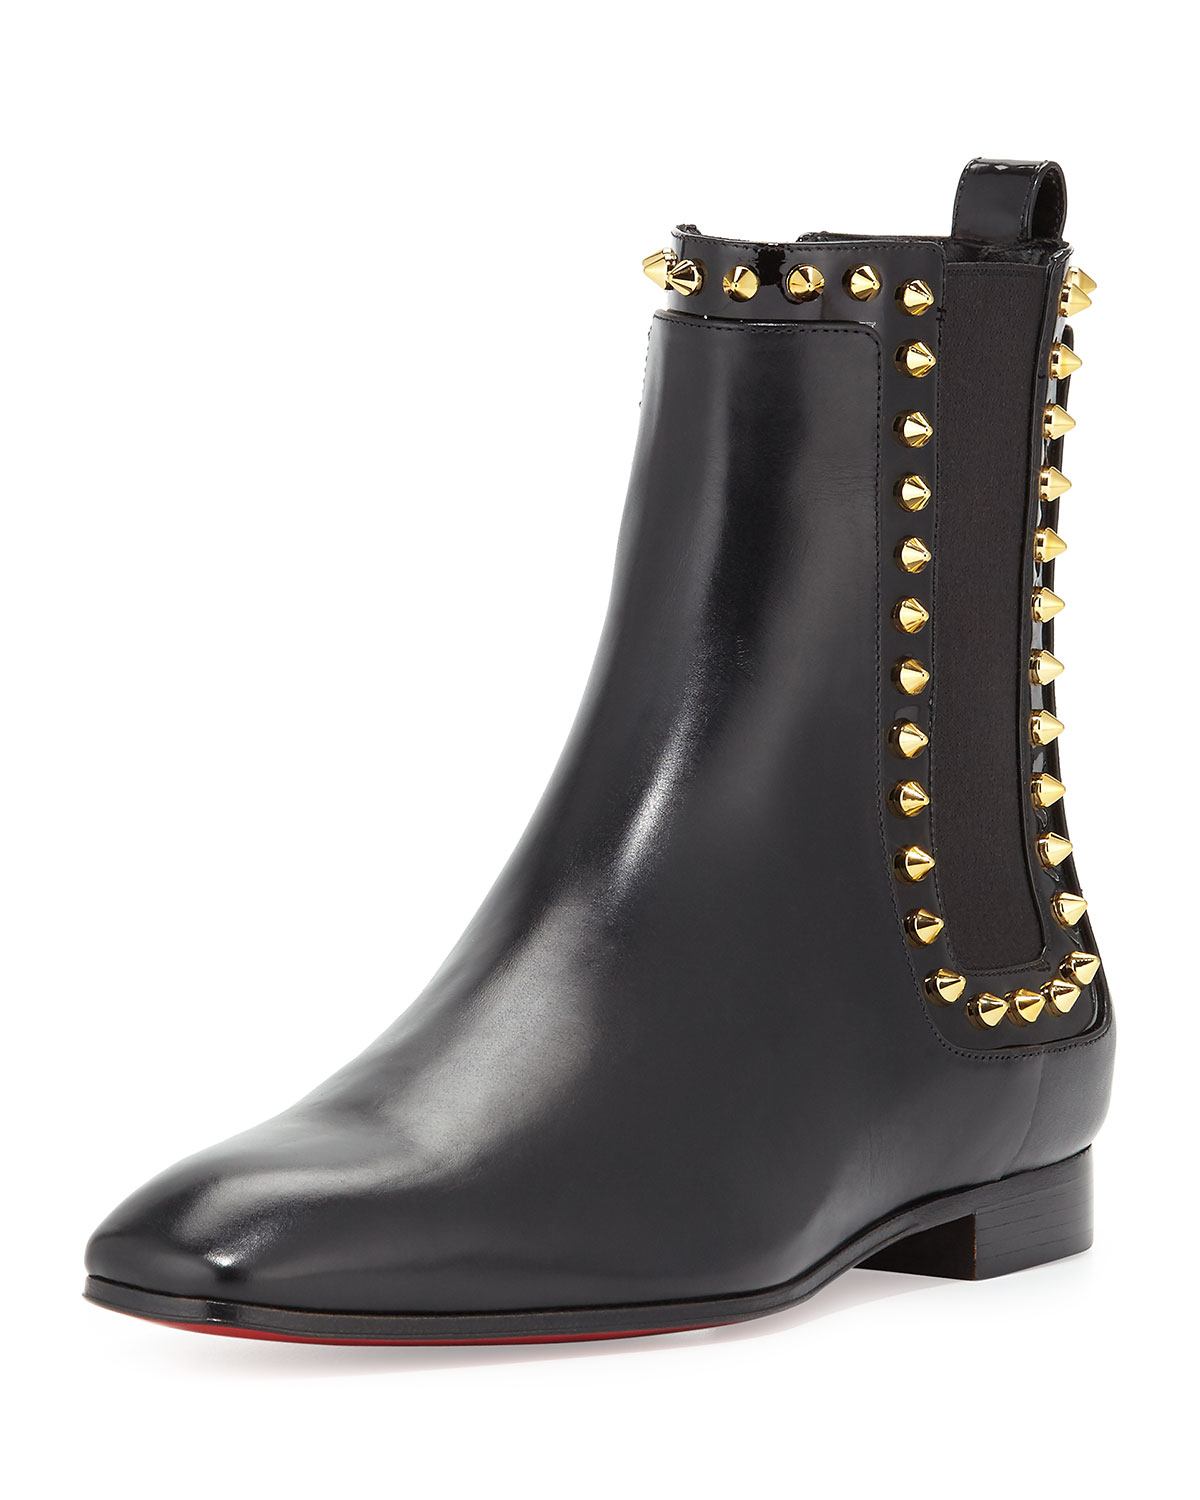 Christian louboutin Marianne Red Sole Chelsea Boot in Black | Lyst